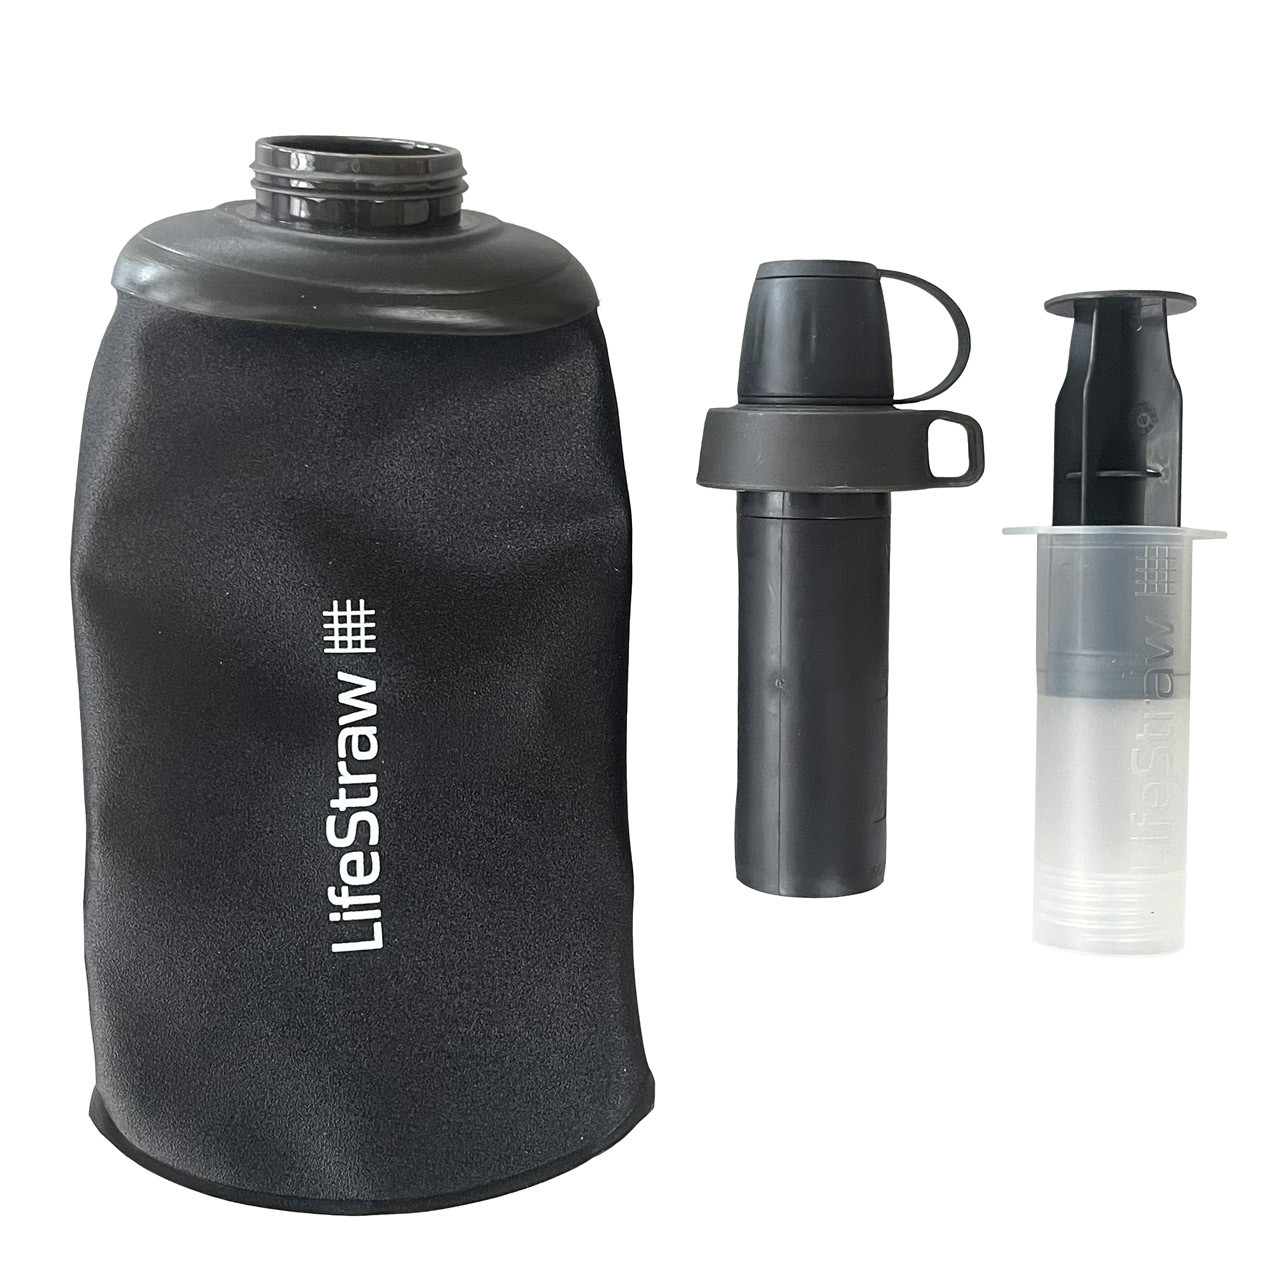 https://cdn11.bigcommerce.com/s-rd4j7/images/stencil/1280x1280/products/3469/19294/60-0447---Lifestraw-Peak-Series-Collapsible-Squeeze-650mL-Bottle-with-Filter---inside-all---lores__88355.1696342906.jpg?c=2